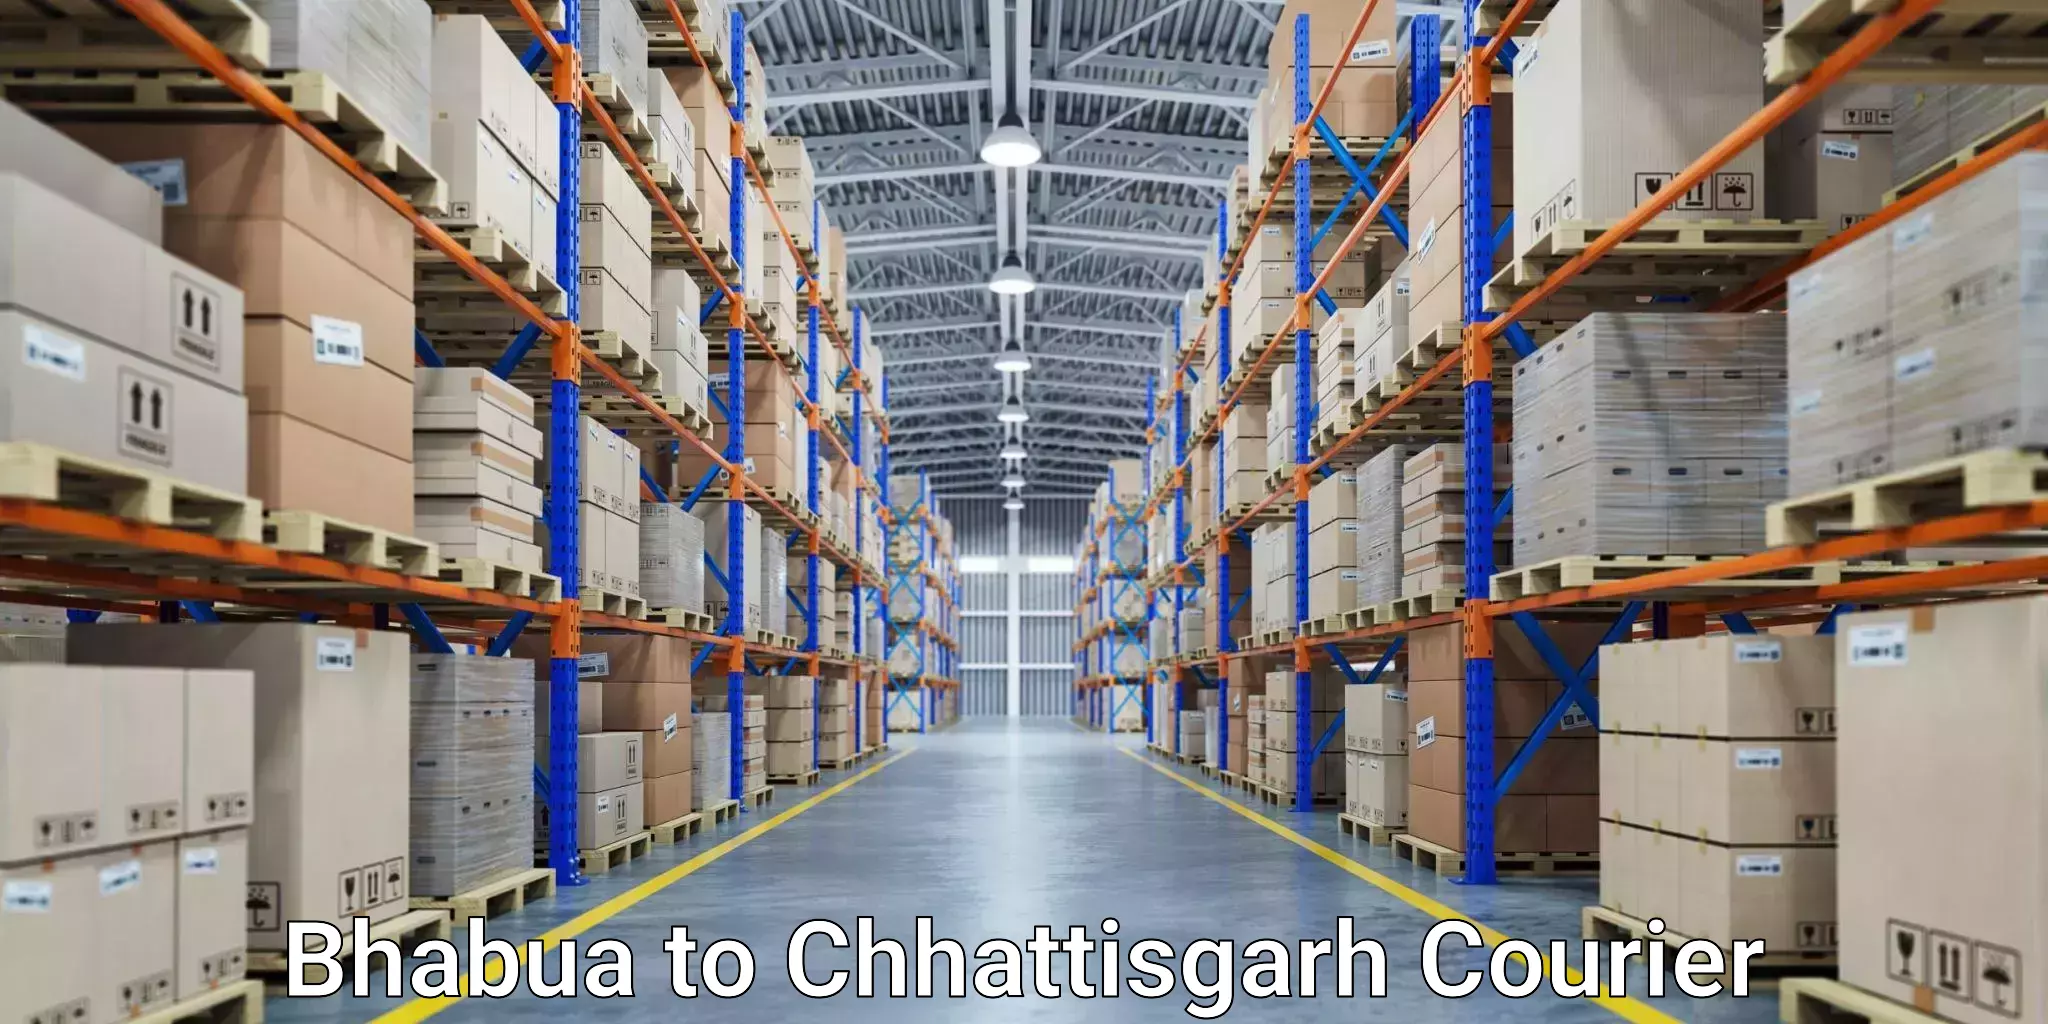 Flexible delivery scheduling Bhabua to Bilaspur